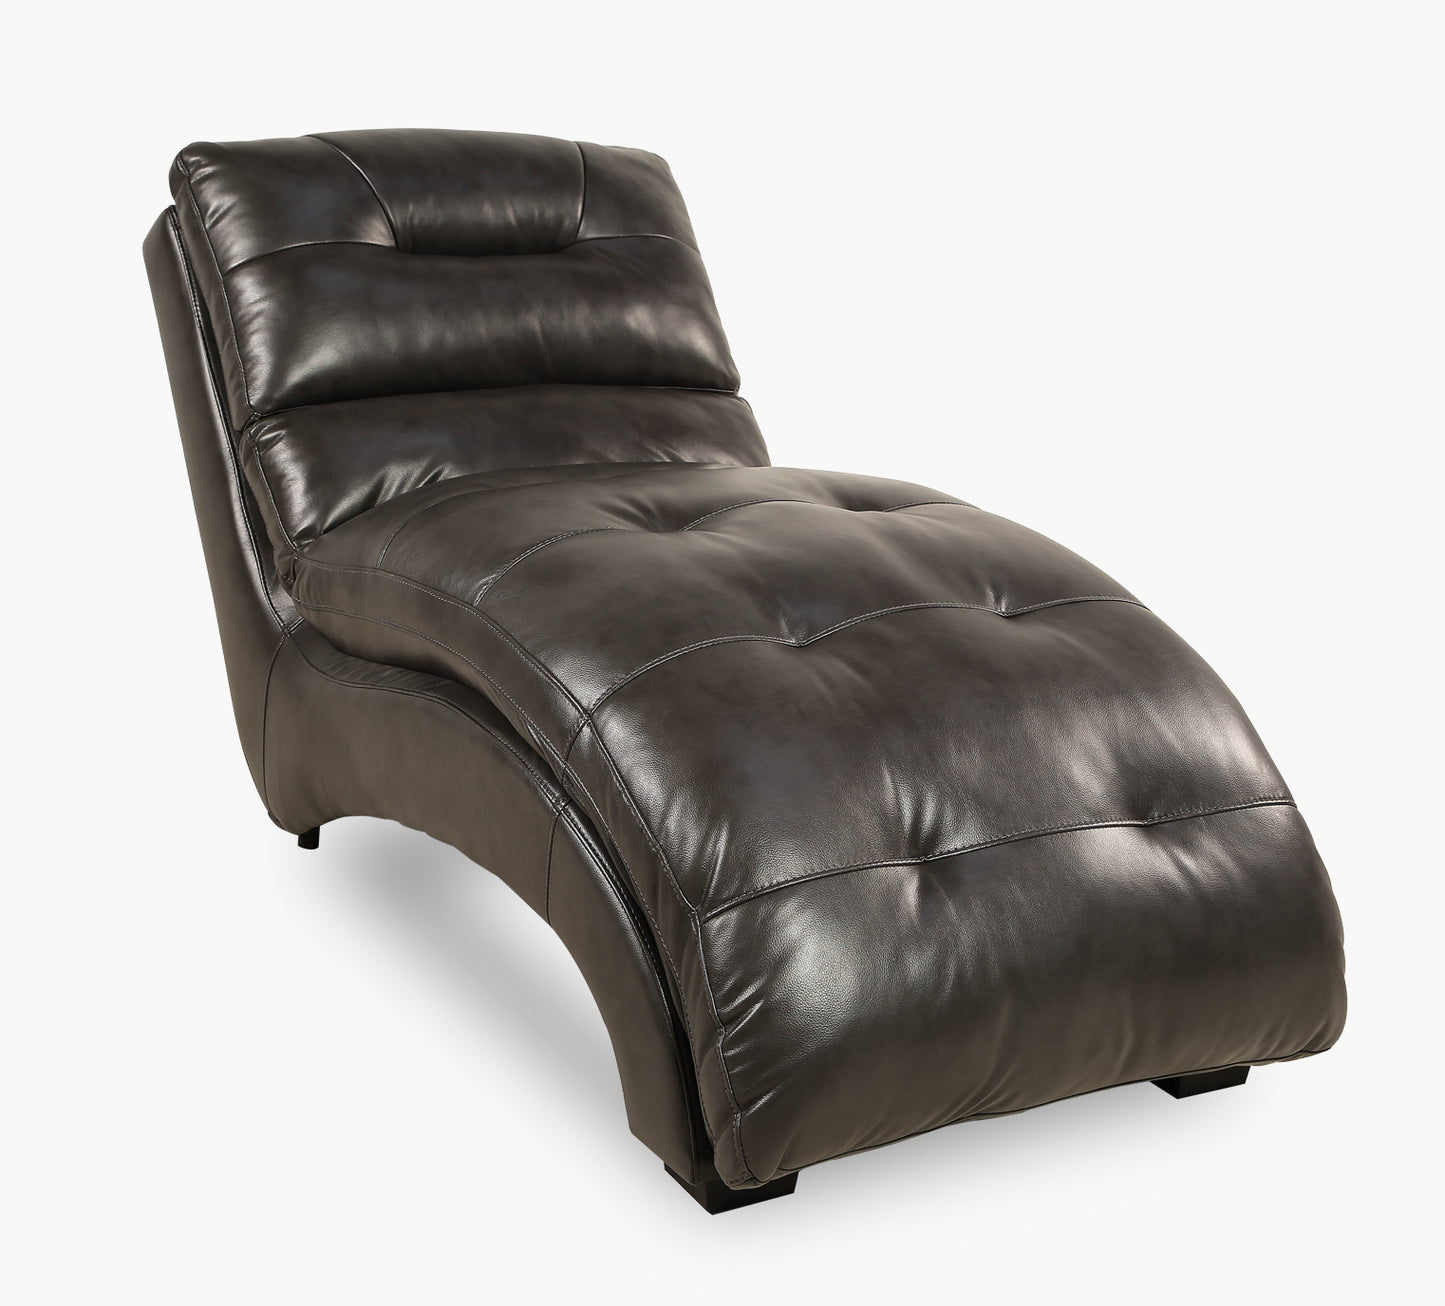 Chaz Grey Chaise Lounge